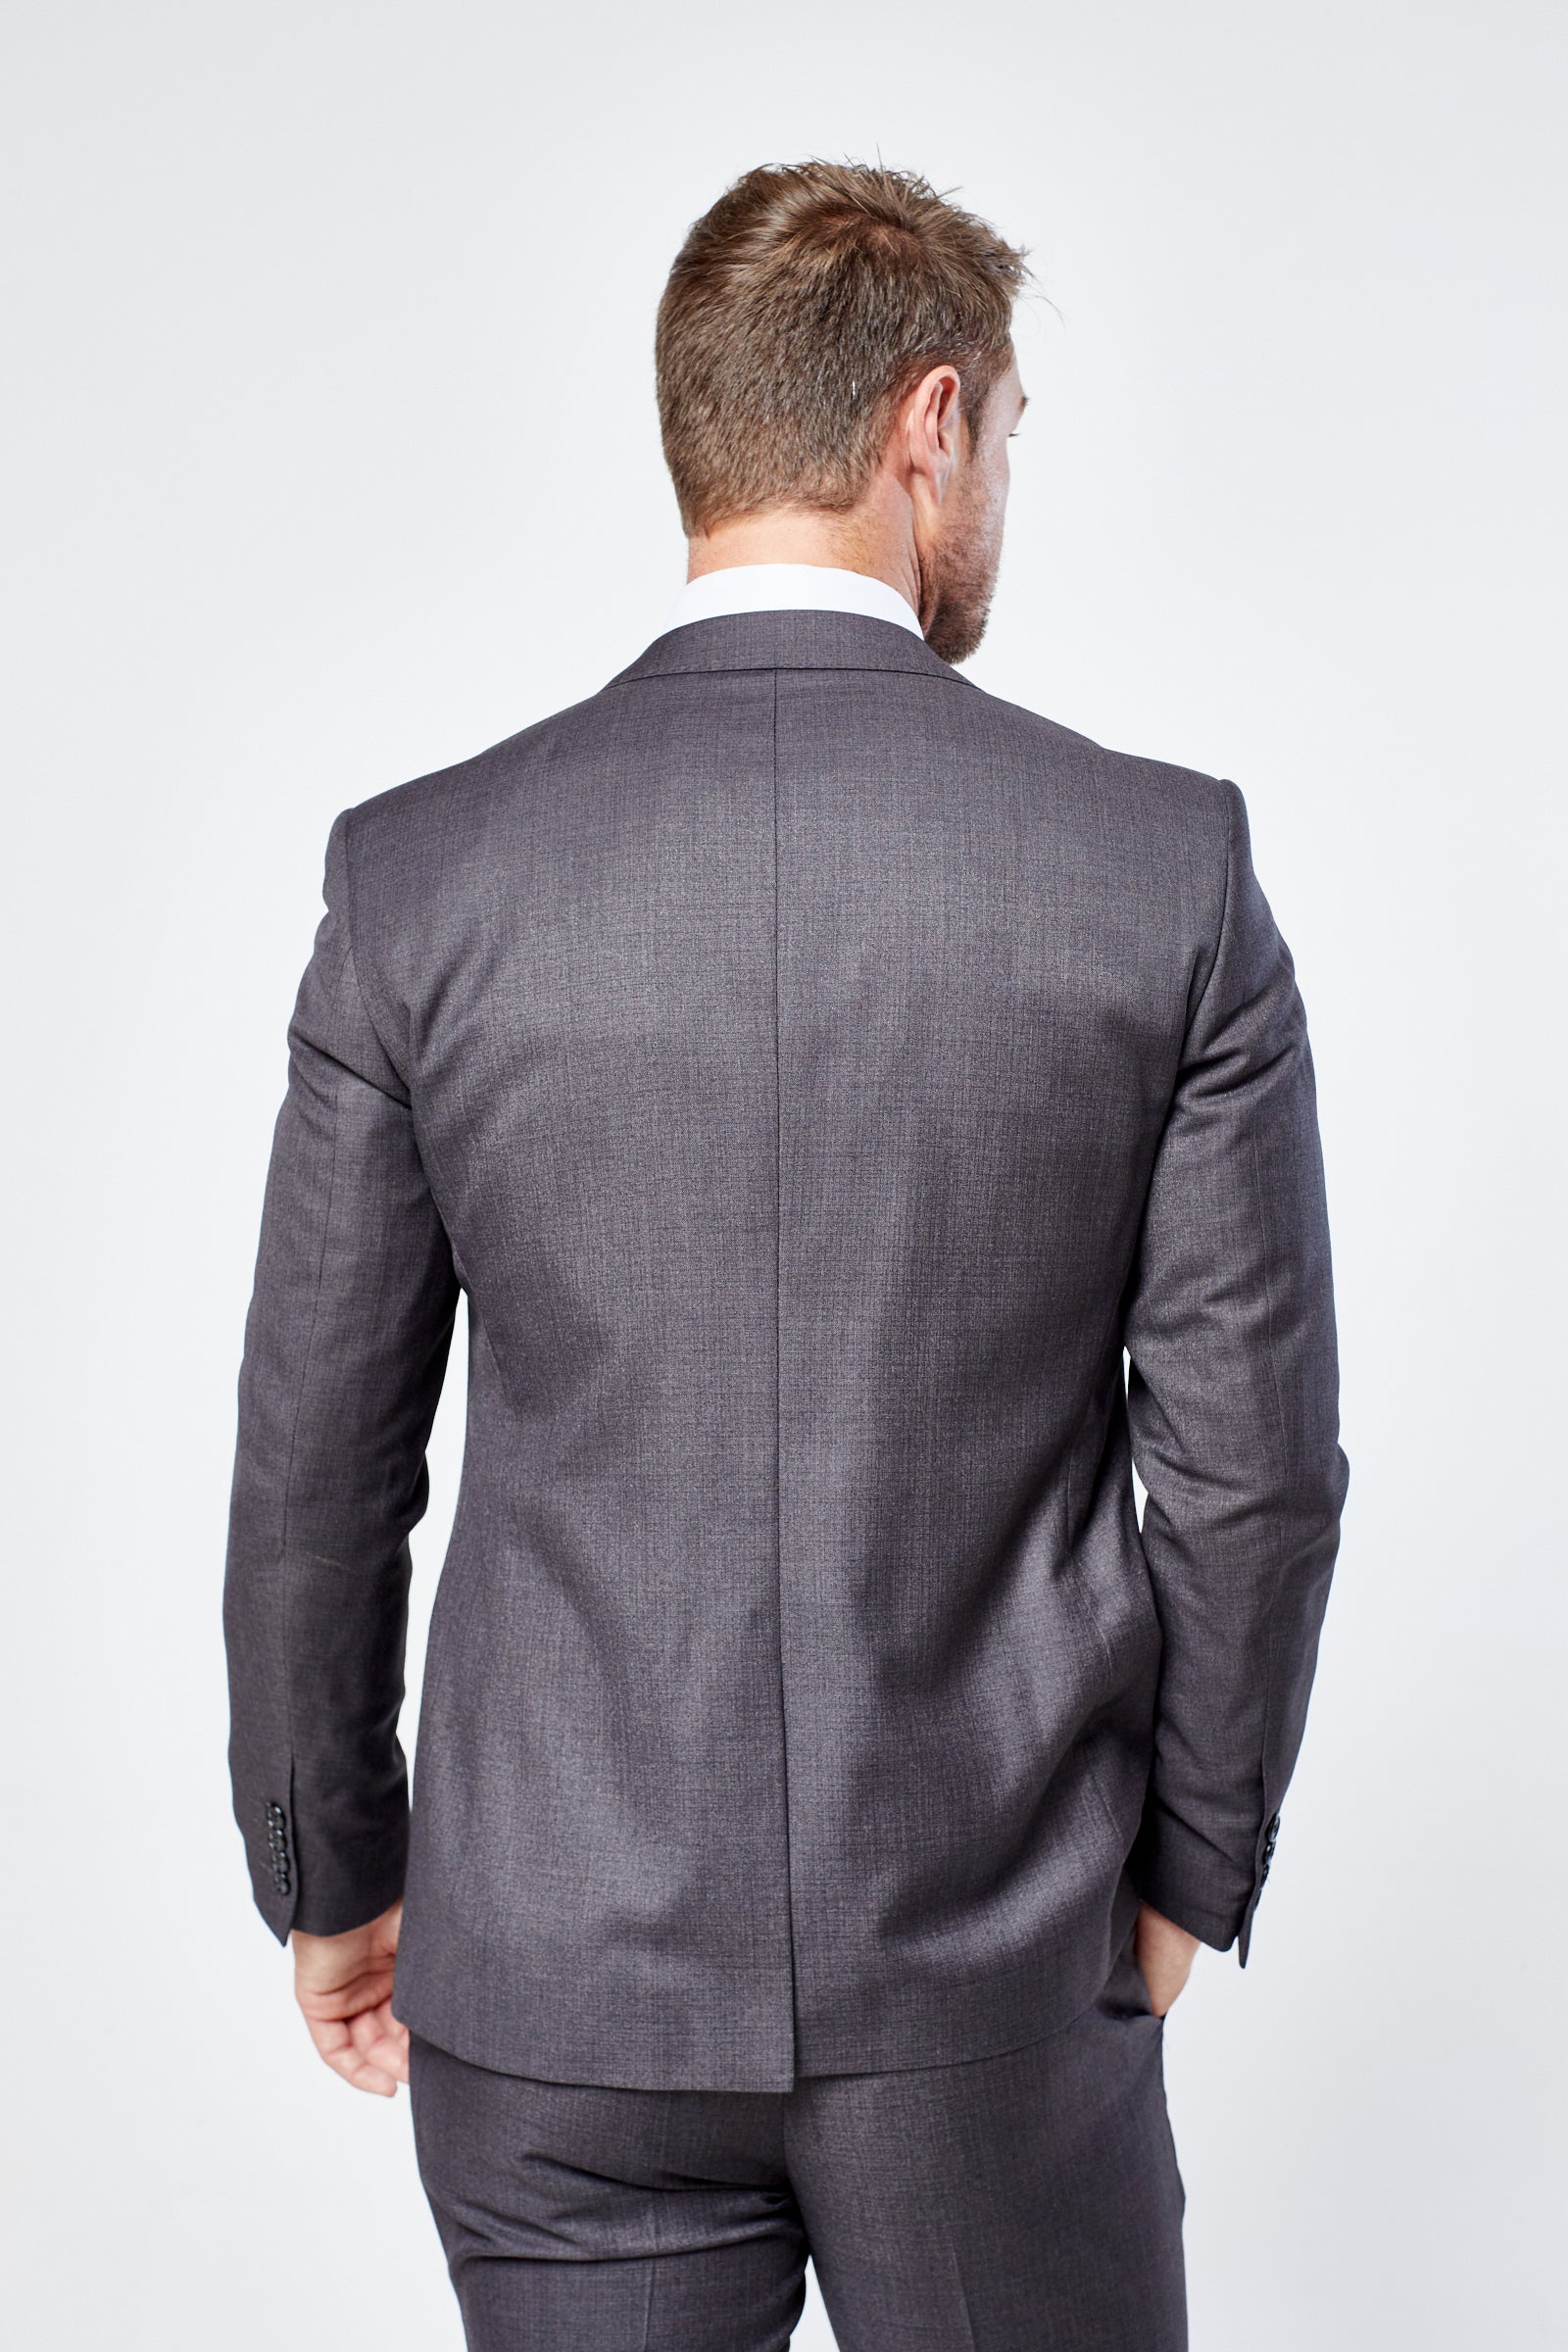 Charles Charcoal Three Piece Suit